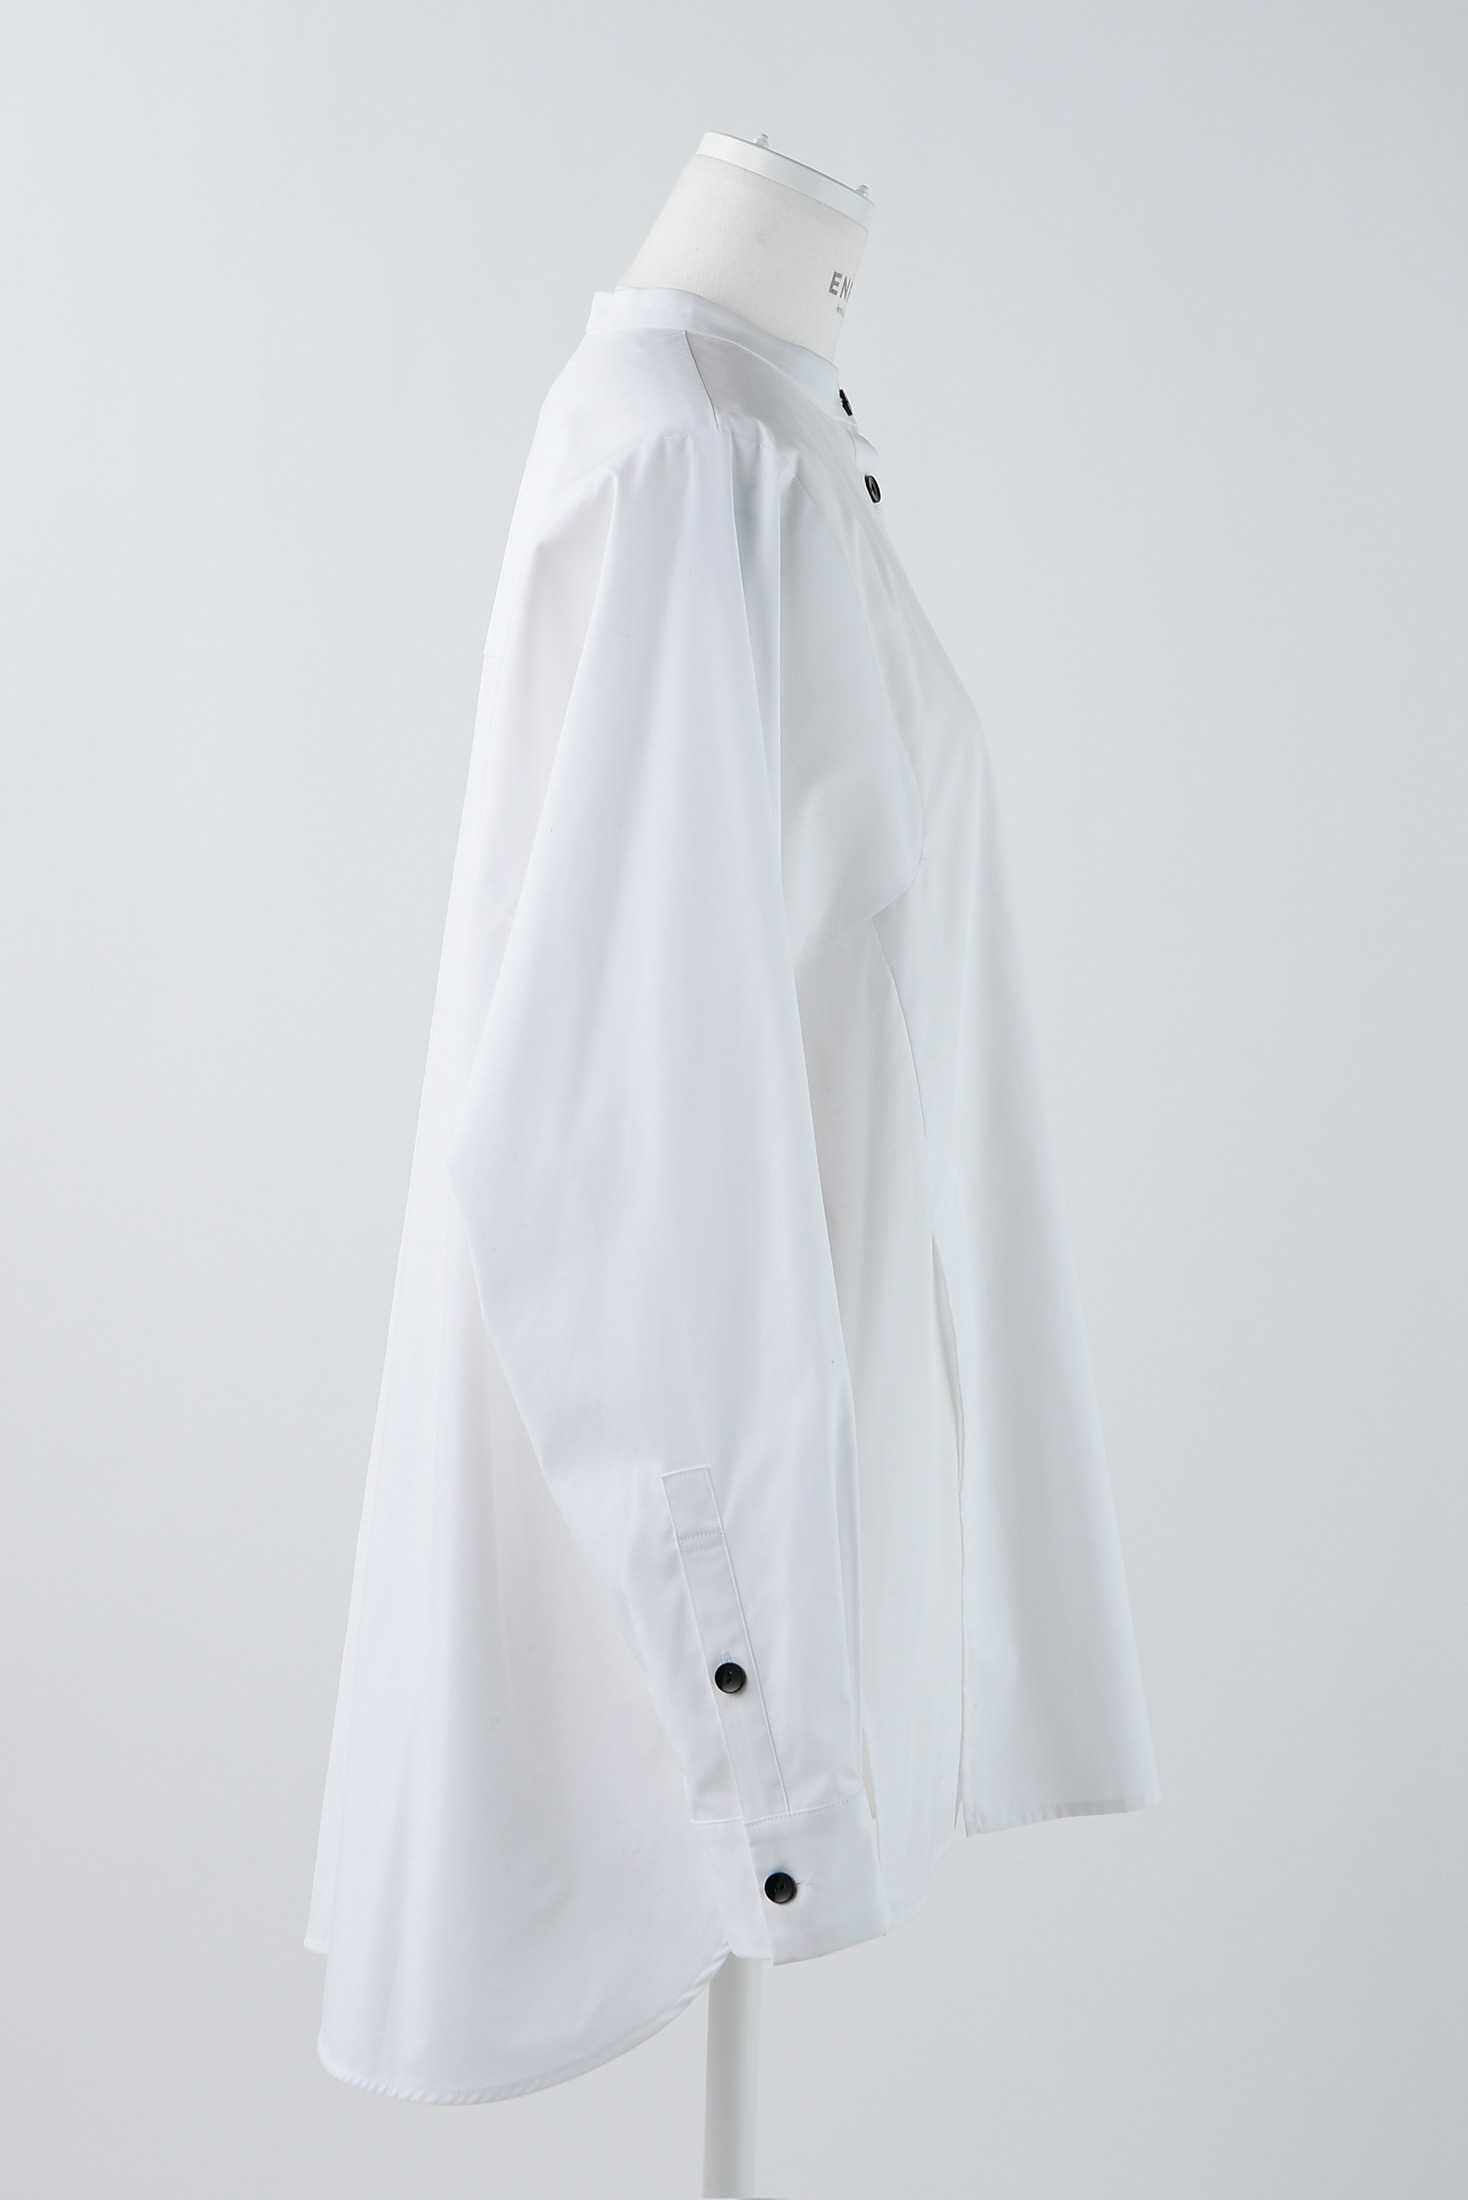 WIDE-SLEEVES SHIRT｜38｜WHT｜SHIRTS AND BLOUSES｜|ENFÖLD OFFICIAL ...